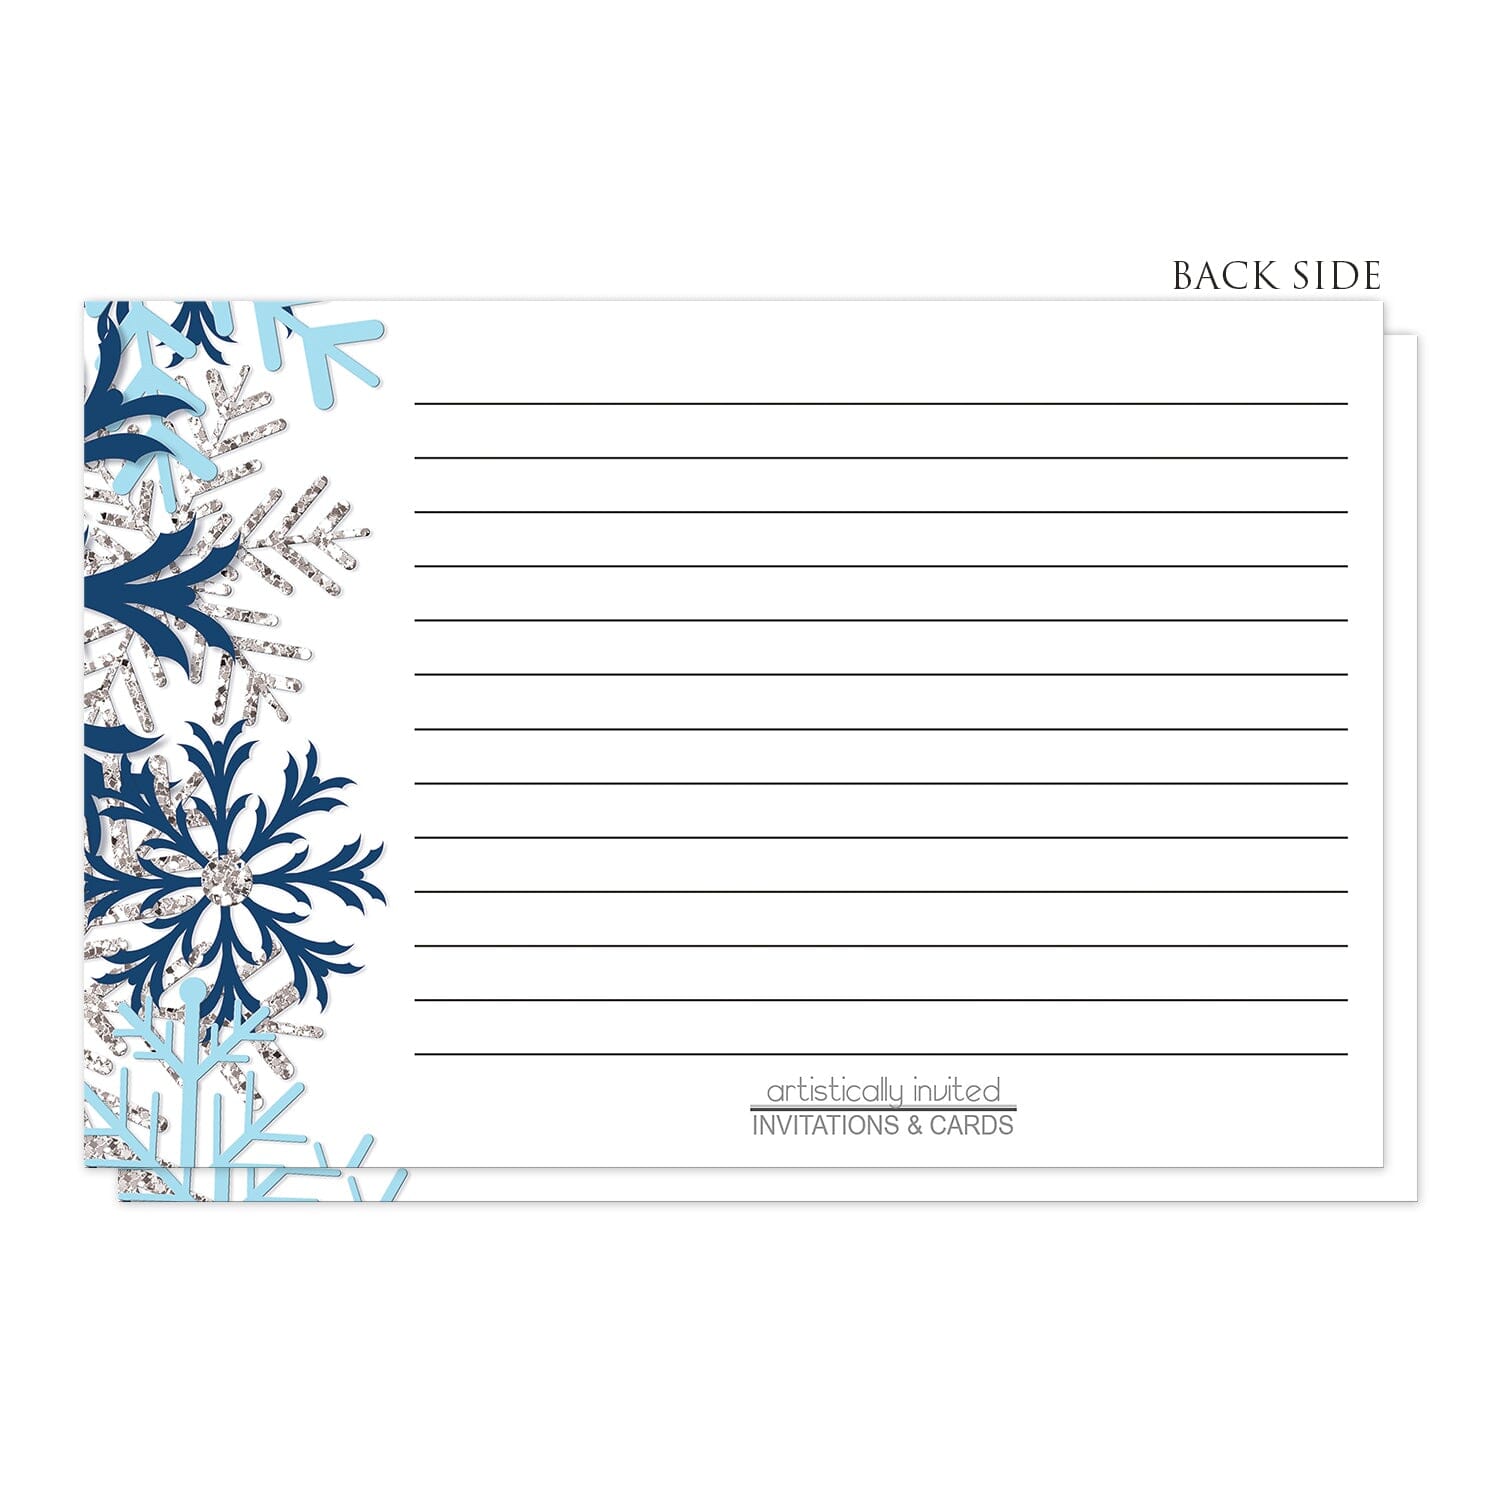 Winter Blue Silver Snowflake Recipe Cards (back side) at Artistically Invited.